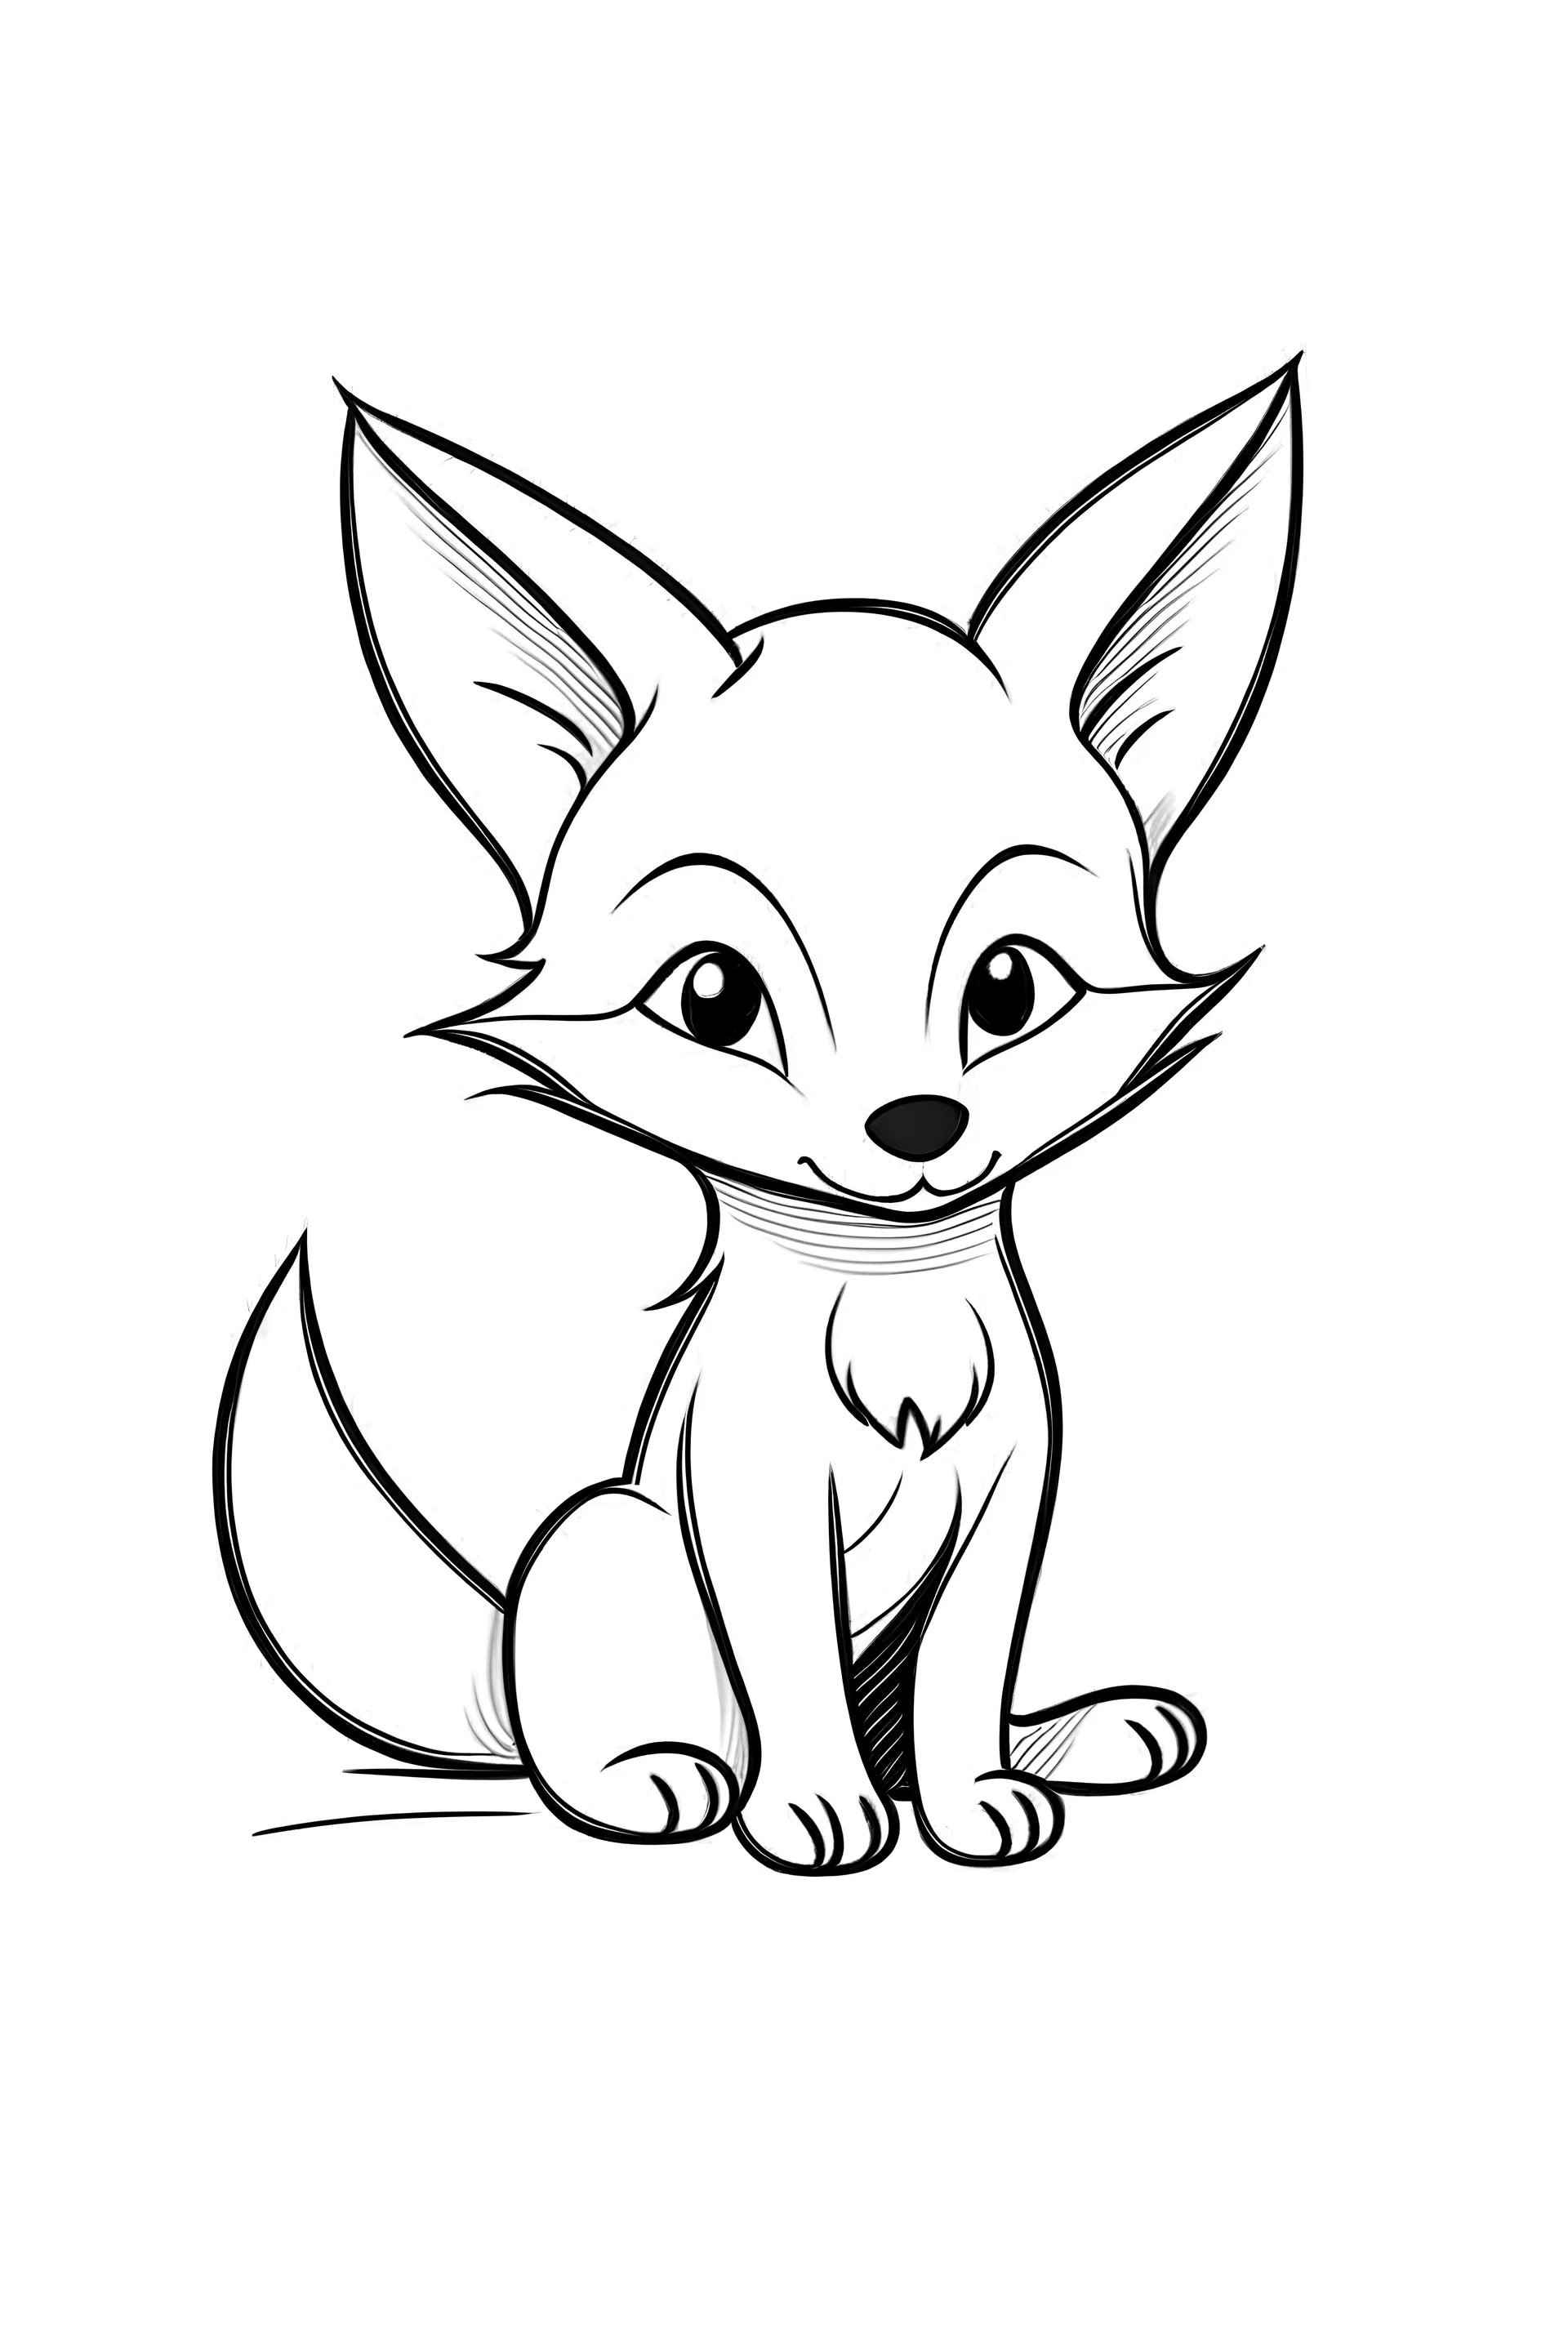 Easy Drawing Guides - Baby Fox Drawing Lesson. Free Online Drawing Tutorial  for Kids. Get the Free Printable Step by Step Drawing Instructions on  https://easydrawingguides.com/how-to-draw-a-baby-fox/ . #BabyFox  #LearnToDraw #ArtProject | Facebook